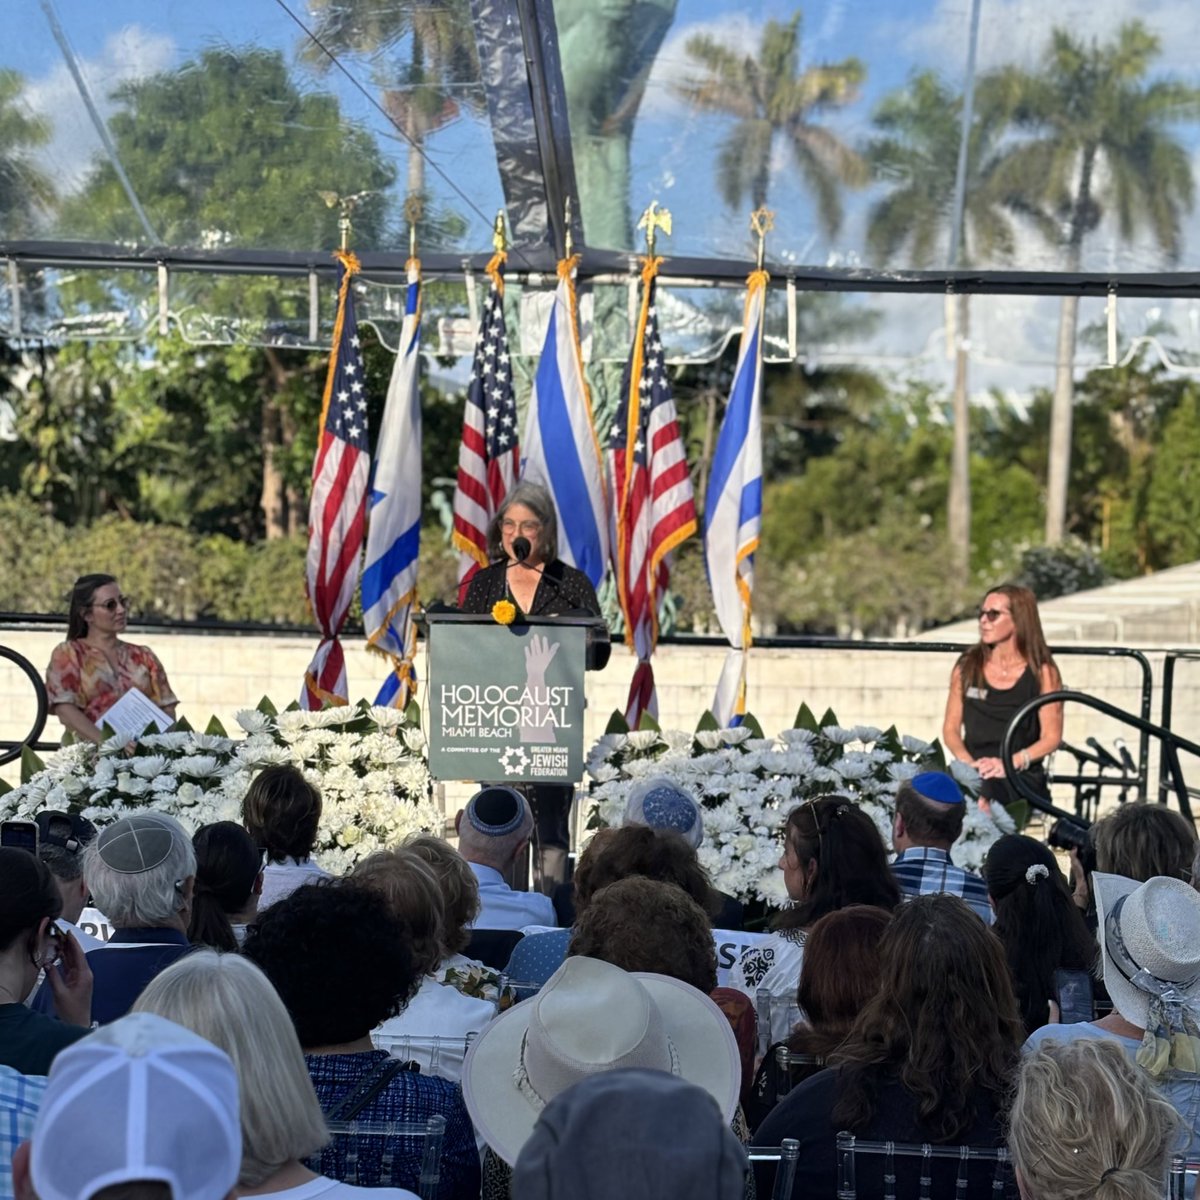 One the eve of Yom HaShoah (Holocaust Remembrance Day) we solemnly remembered the 6 million Jewish souls lost in the Holocaust. As the first Jewish Mayor of Miami-Dade, I honor their memory and the stories of resilience and bravery from survivors and supporters.